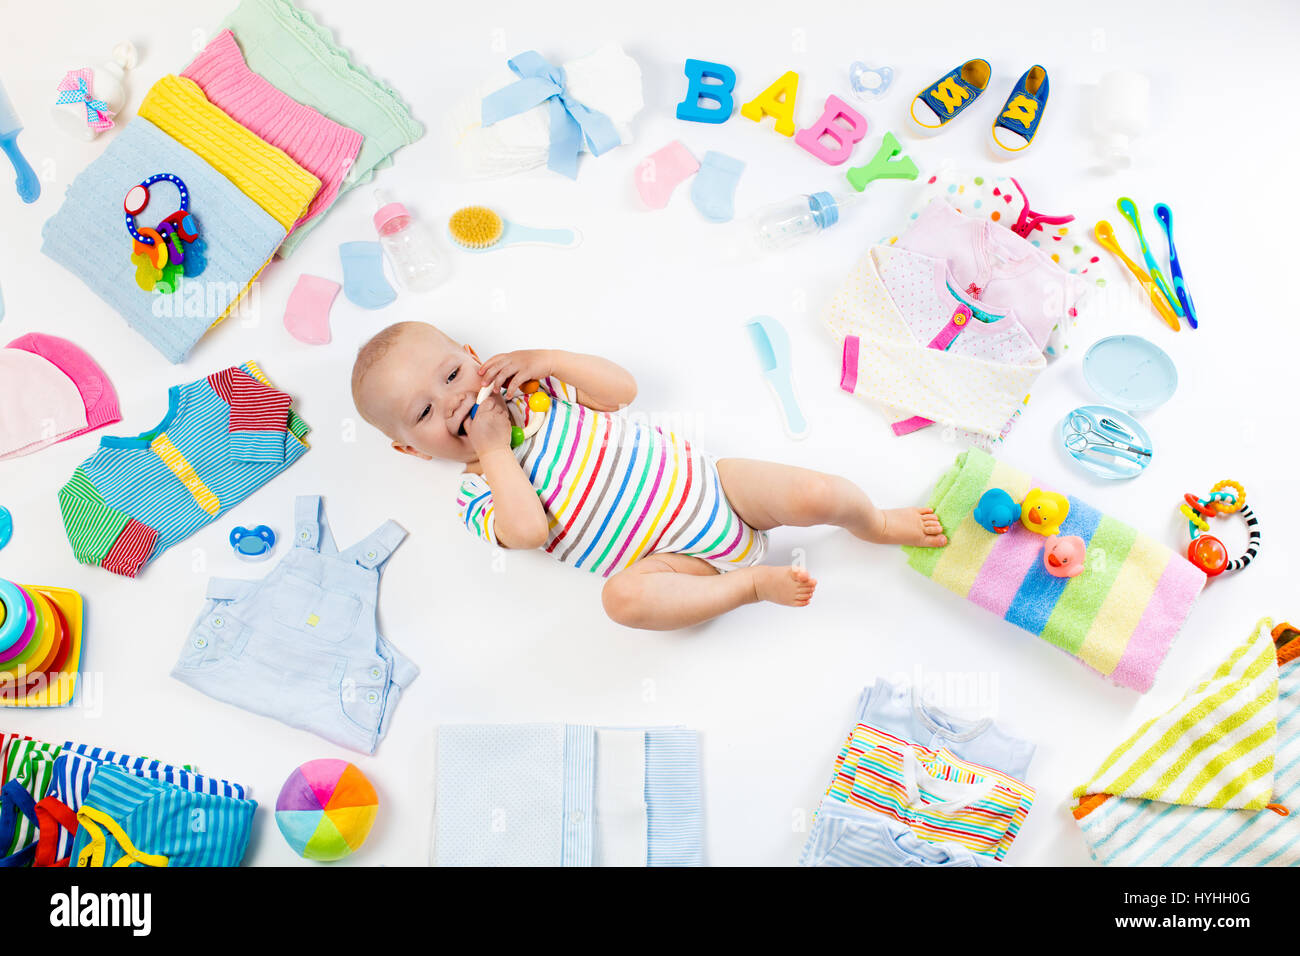 Baby on white background with clothing, toiletries, toys and health ...